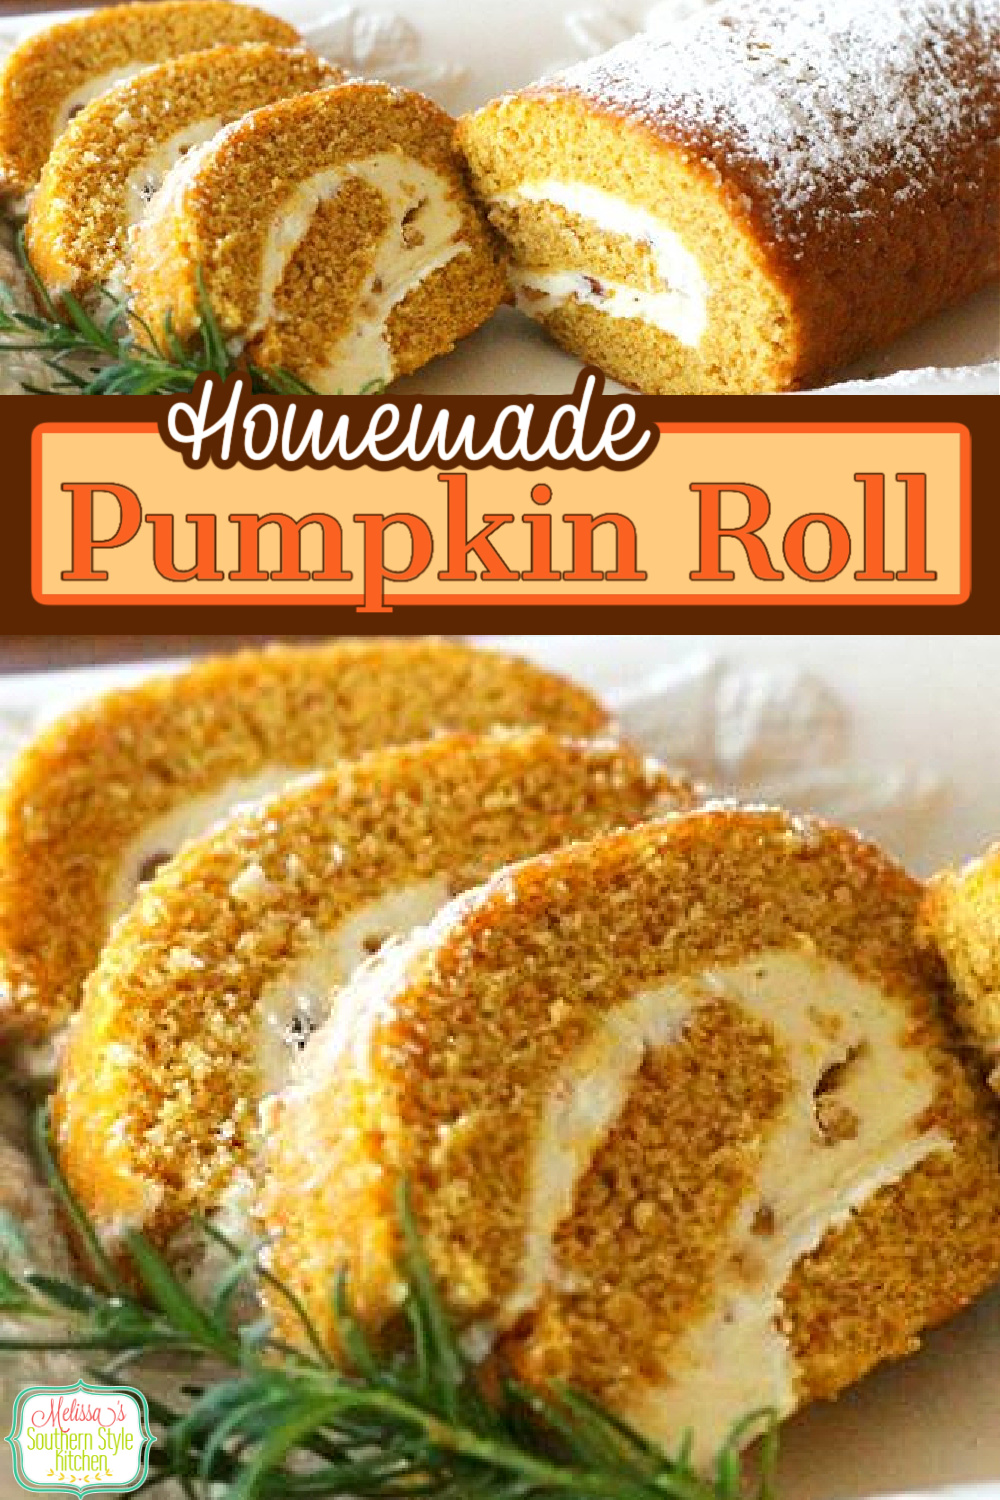 This scrumptious Pumpkin Cake Roll has a delicious toffee and pecan surprise tucked away in the cream cheese swirl #pumpkinroll #pumpkincake #fallbaking #pumpkin #creamcheese #desserts #dessertfoodrecipes #thanksgiving #pecans #cakerecipes #cakes #falldesserts #holidaybaking #thanksgivingdesserts #southernrecipes #southernfood via @melissasssk